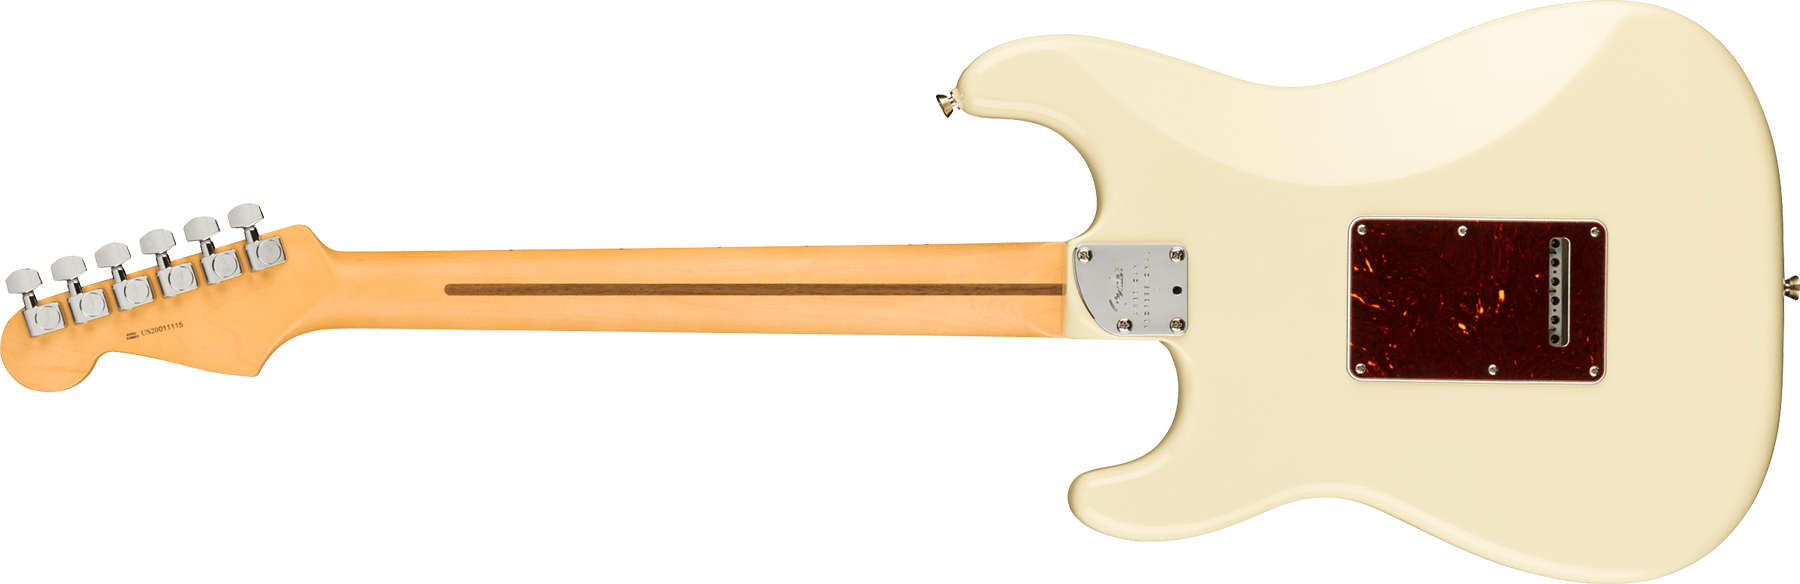 Fender Strat American Professional Ii Usa Mn - Olympic White - Guitare Électrique Forme Str - Variation 1